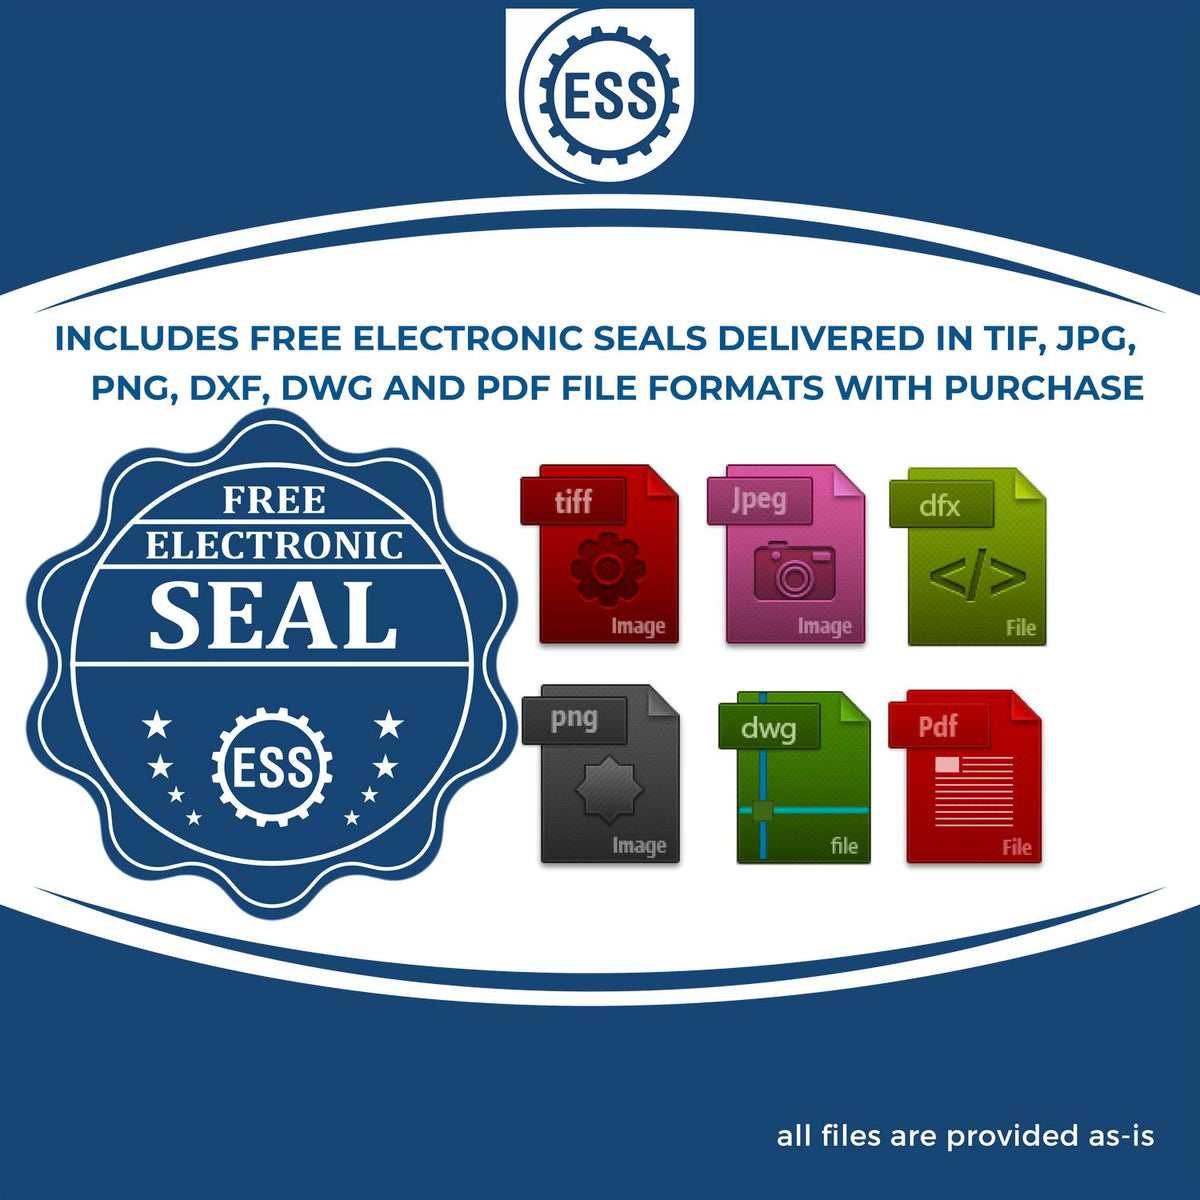 An infographic for the free electronic seal for the Heavy-Duty Indiana Rectangular Notary Stamp illustrating the different file type icons such as DXF, DWG, TIF, JPG and PNG.